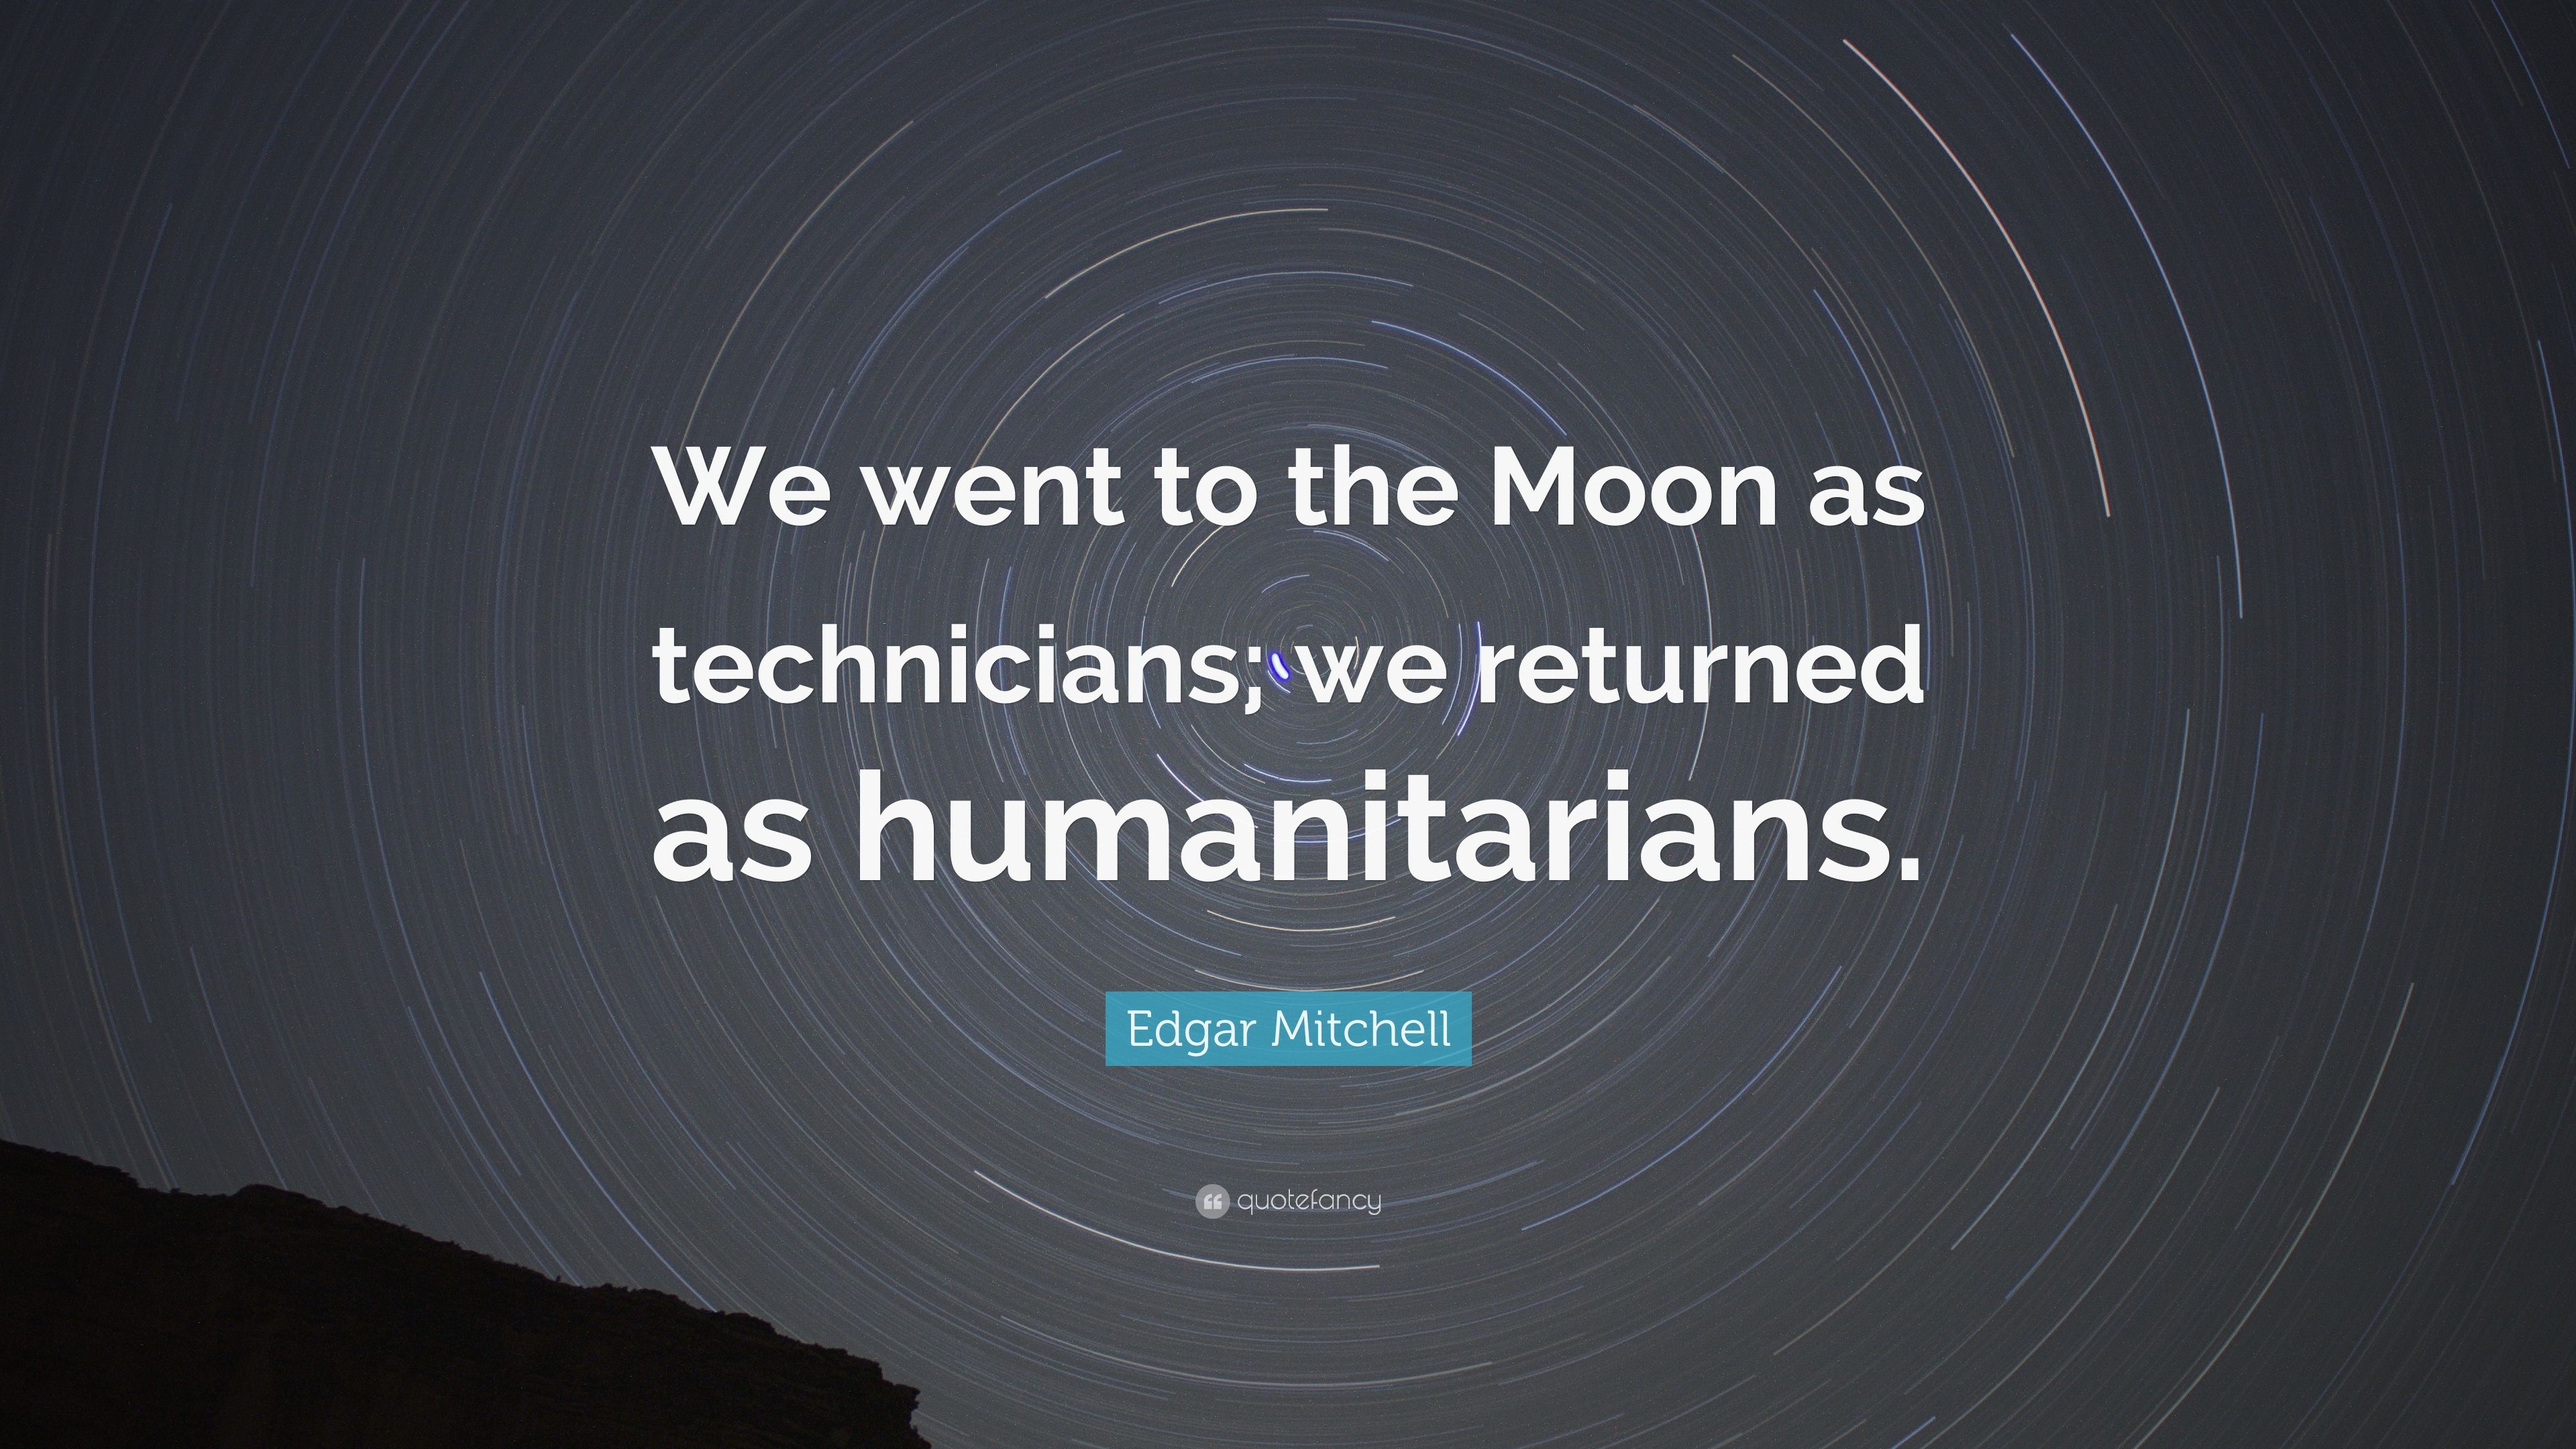 Edgar Mitchell Quote: “We went to the Moon as technicians; we